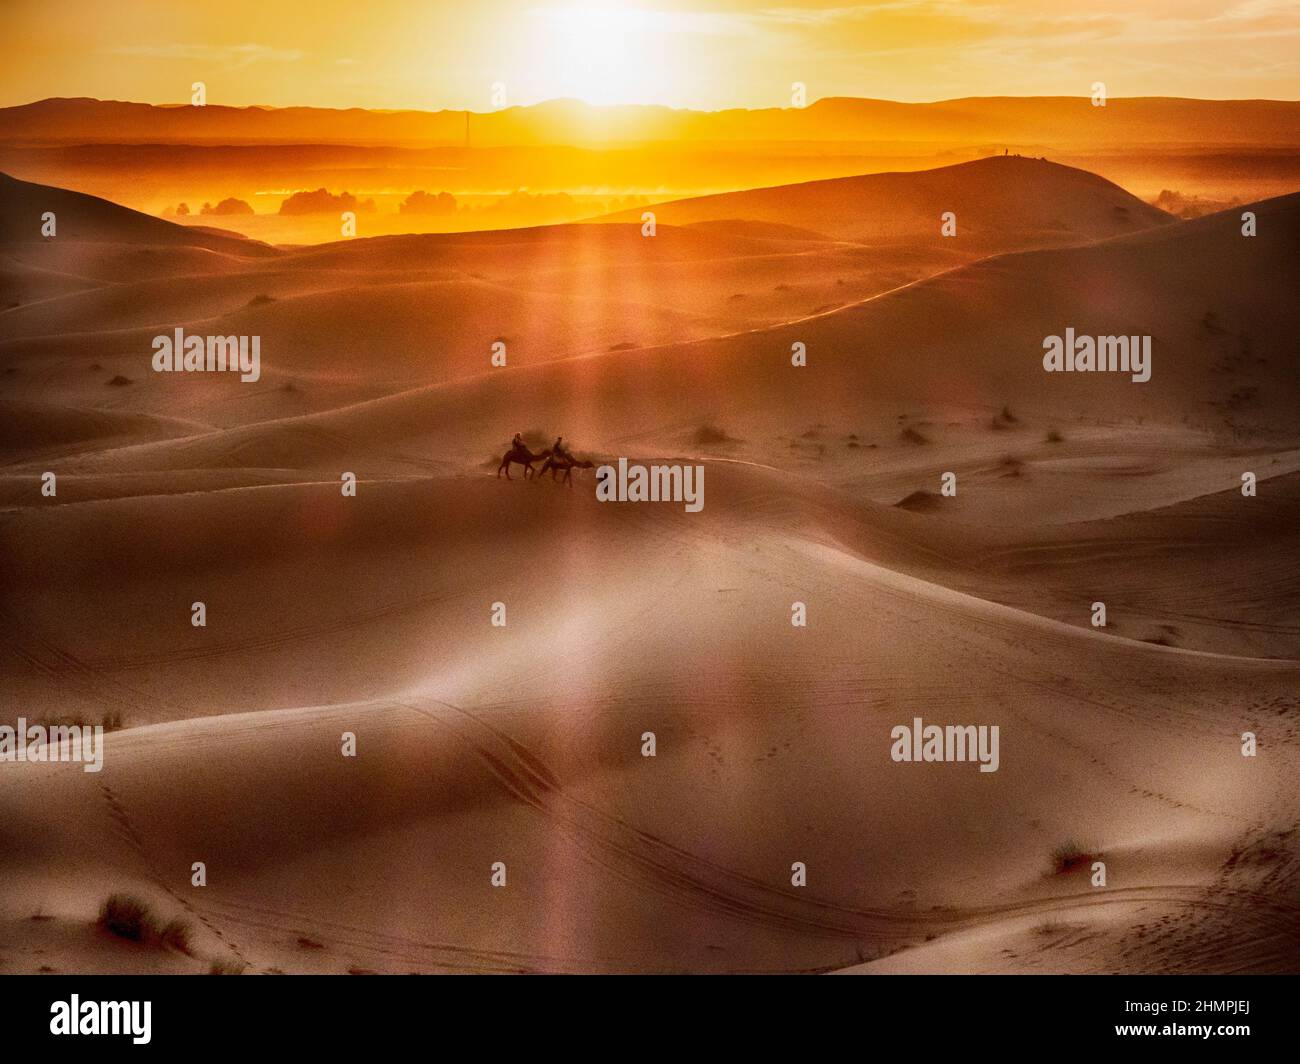 Silhouette of a man leading two camels through Sahara desert at sunset, Morocco Stock Photo